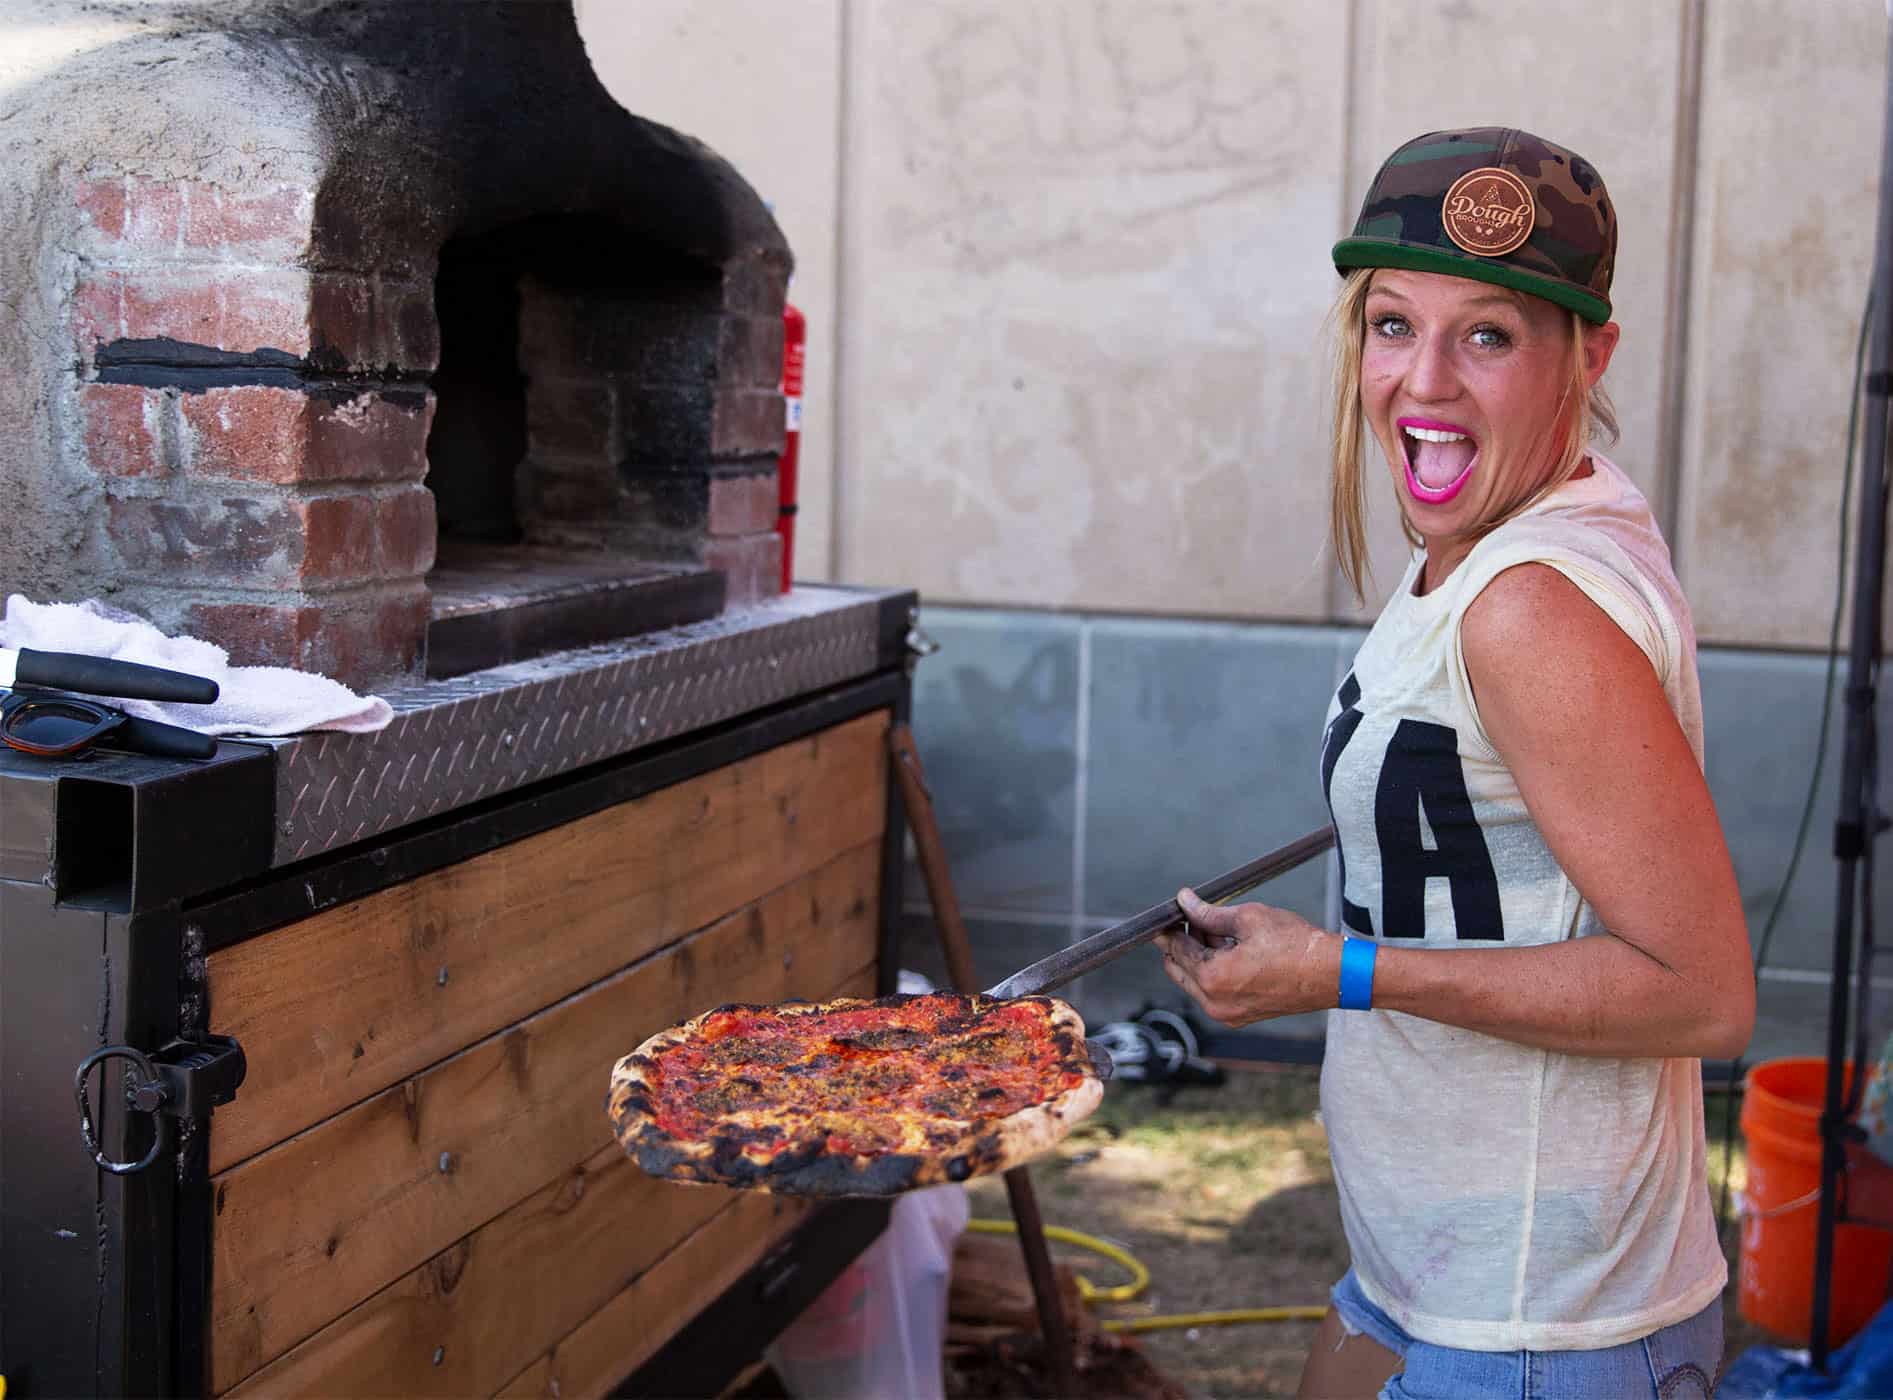 Lady placing a homemade pizza from Dough Broughs Pizza into a red brick oven at a food event in Scottsdale, Arizona.